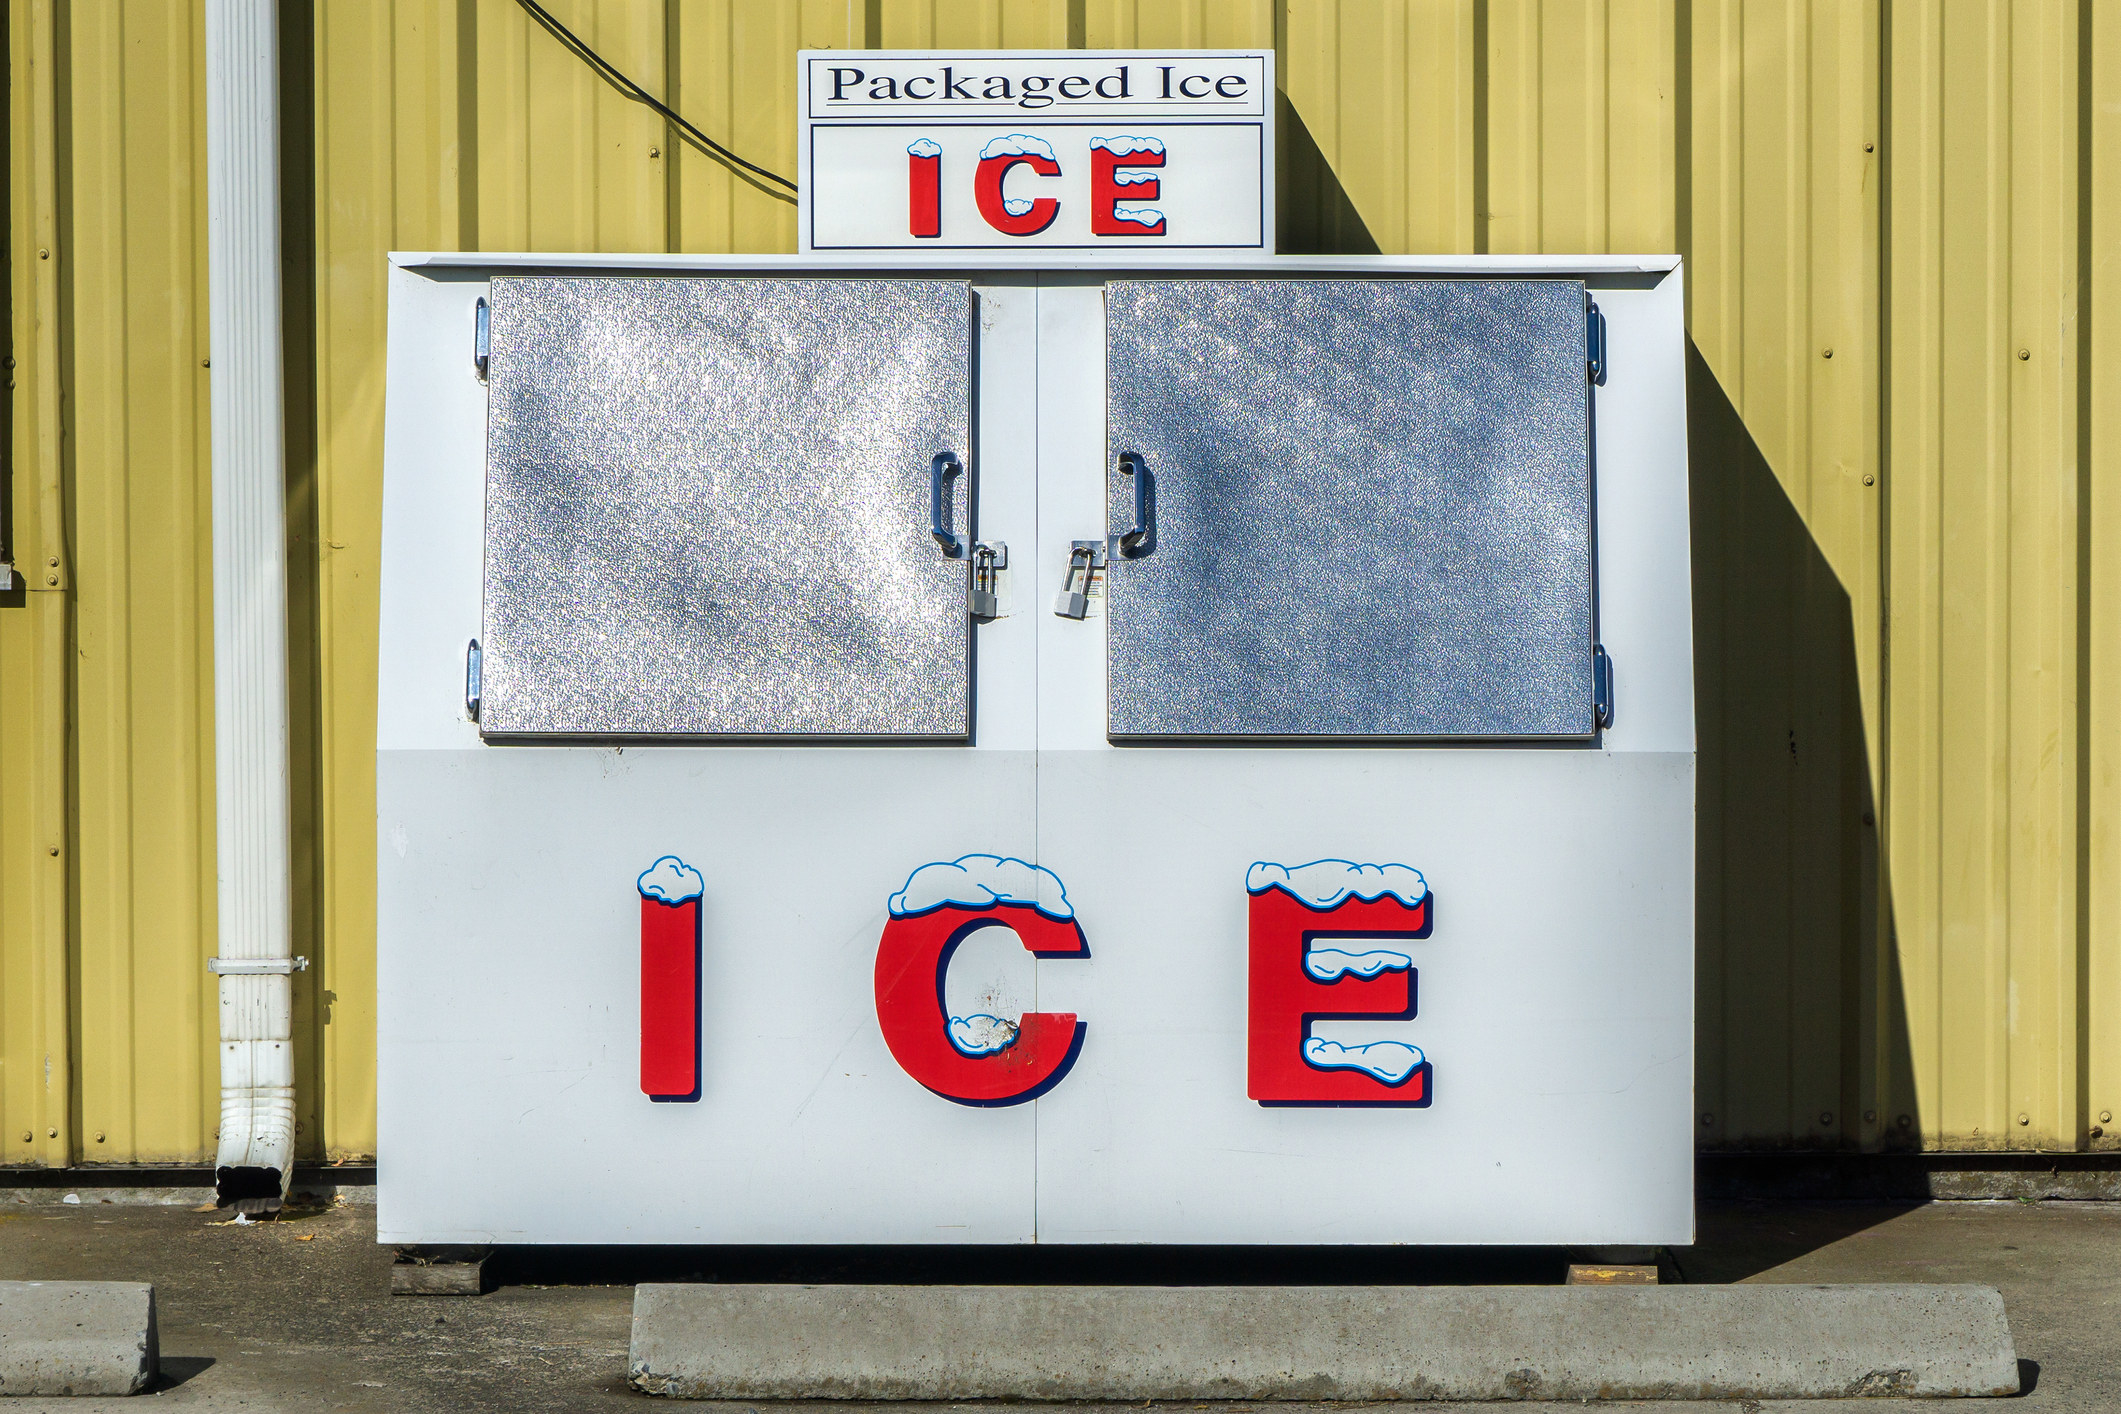 Packaged Ice freezer machine against a yellow wall during a hot and sunny day of summer outside a grocery store